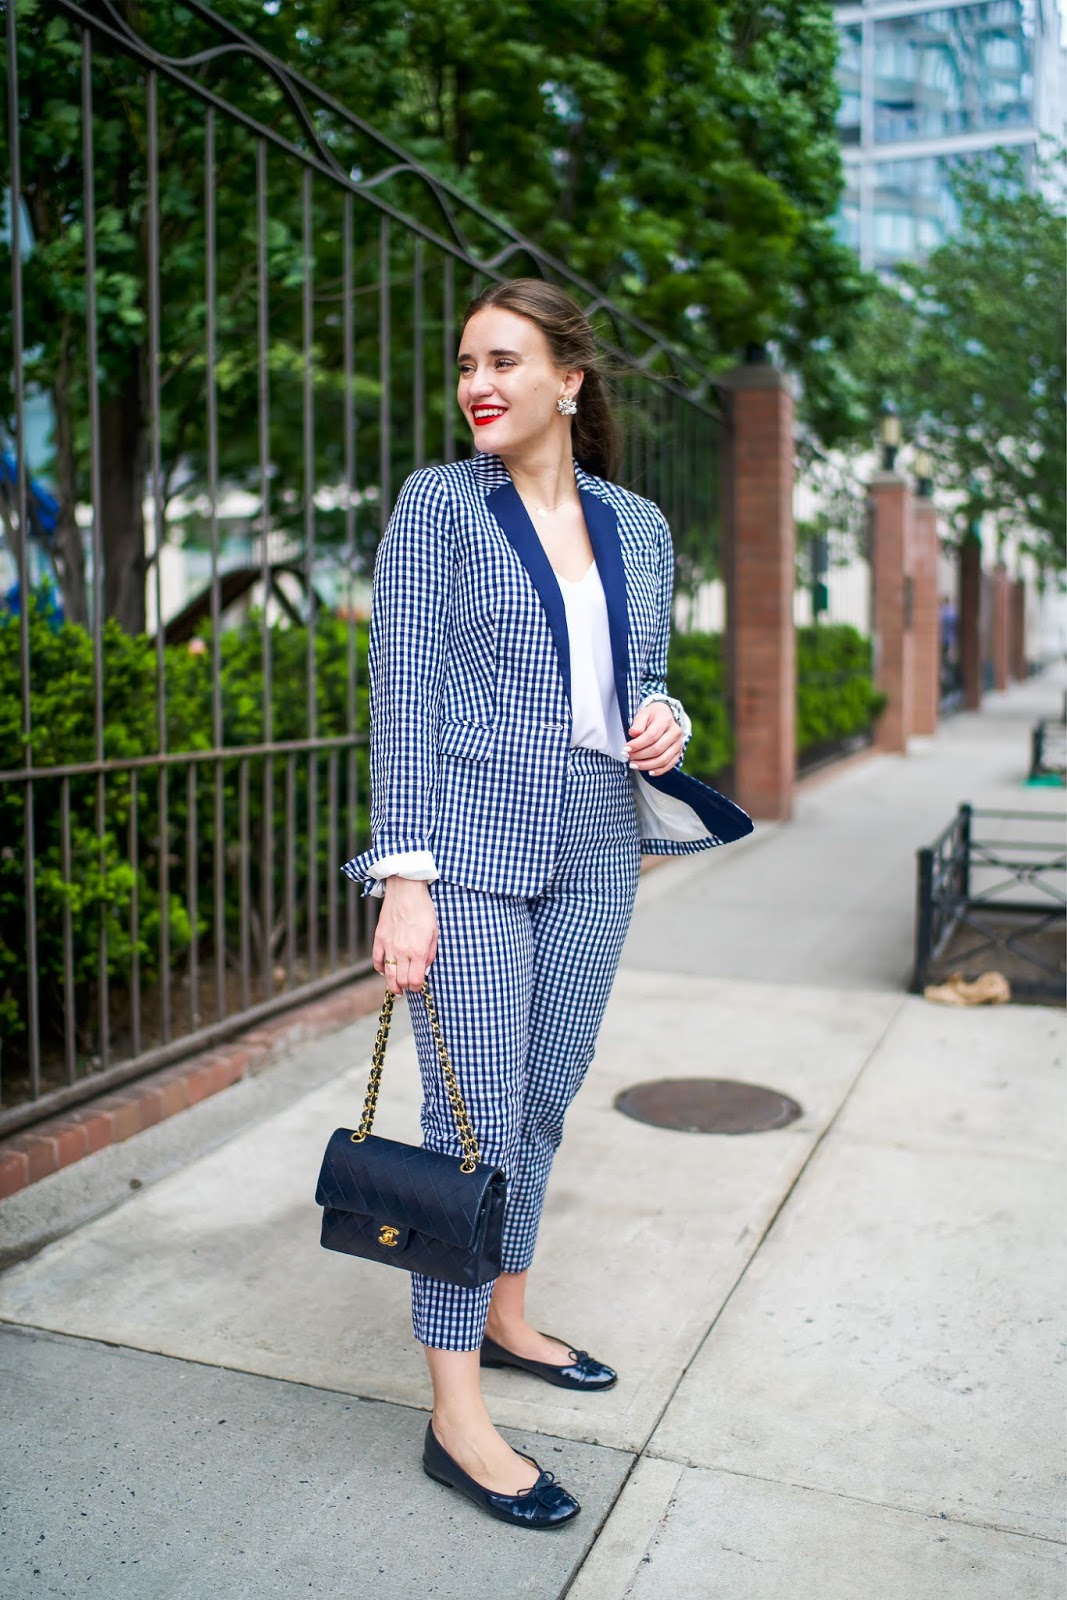 J.Crew Gingham Suit styled by popular New York style blogger, Covering the Bases